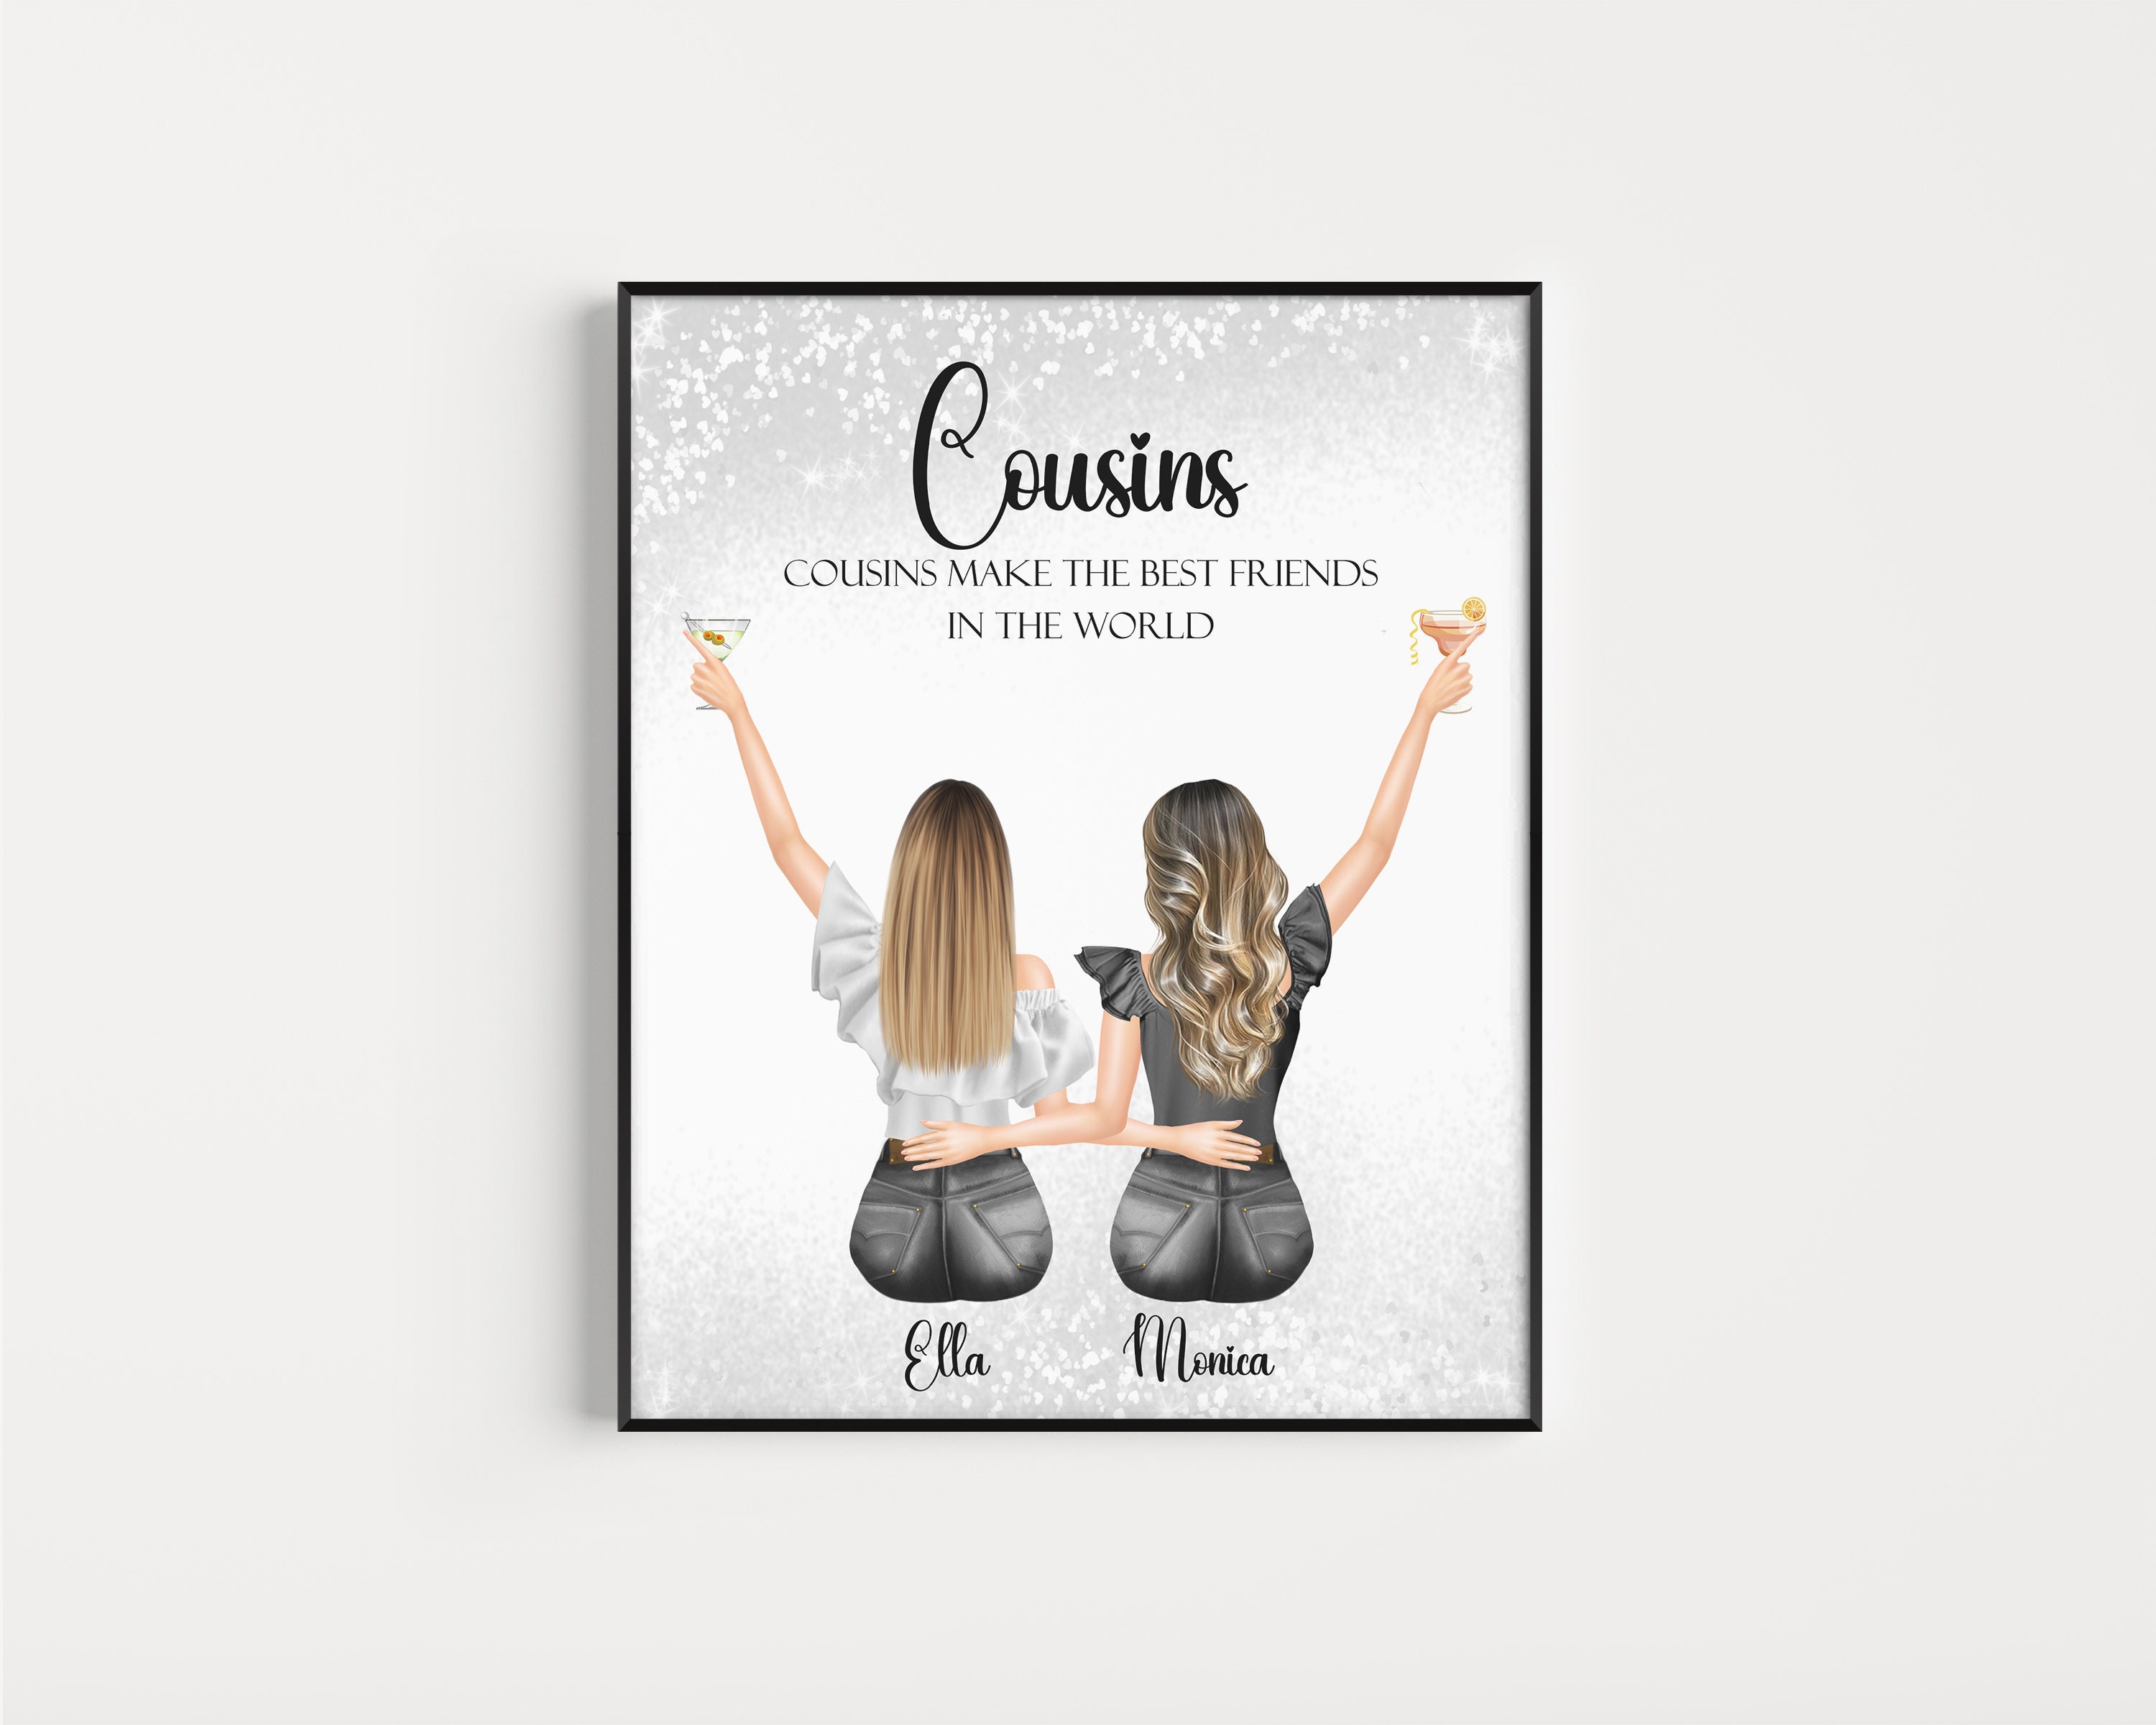 Sister Gift Personalised Gift Sister Print, Gifts for Her, Sisters